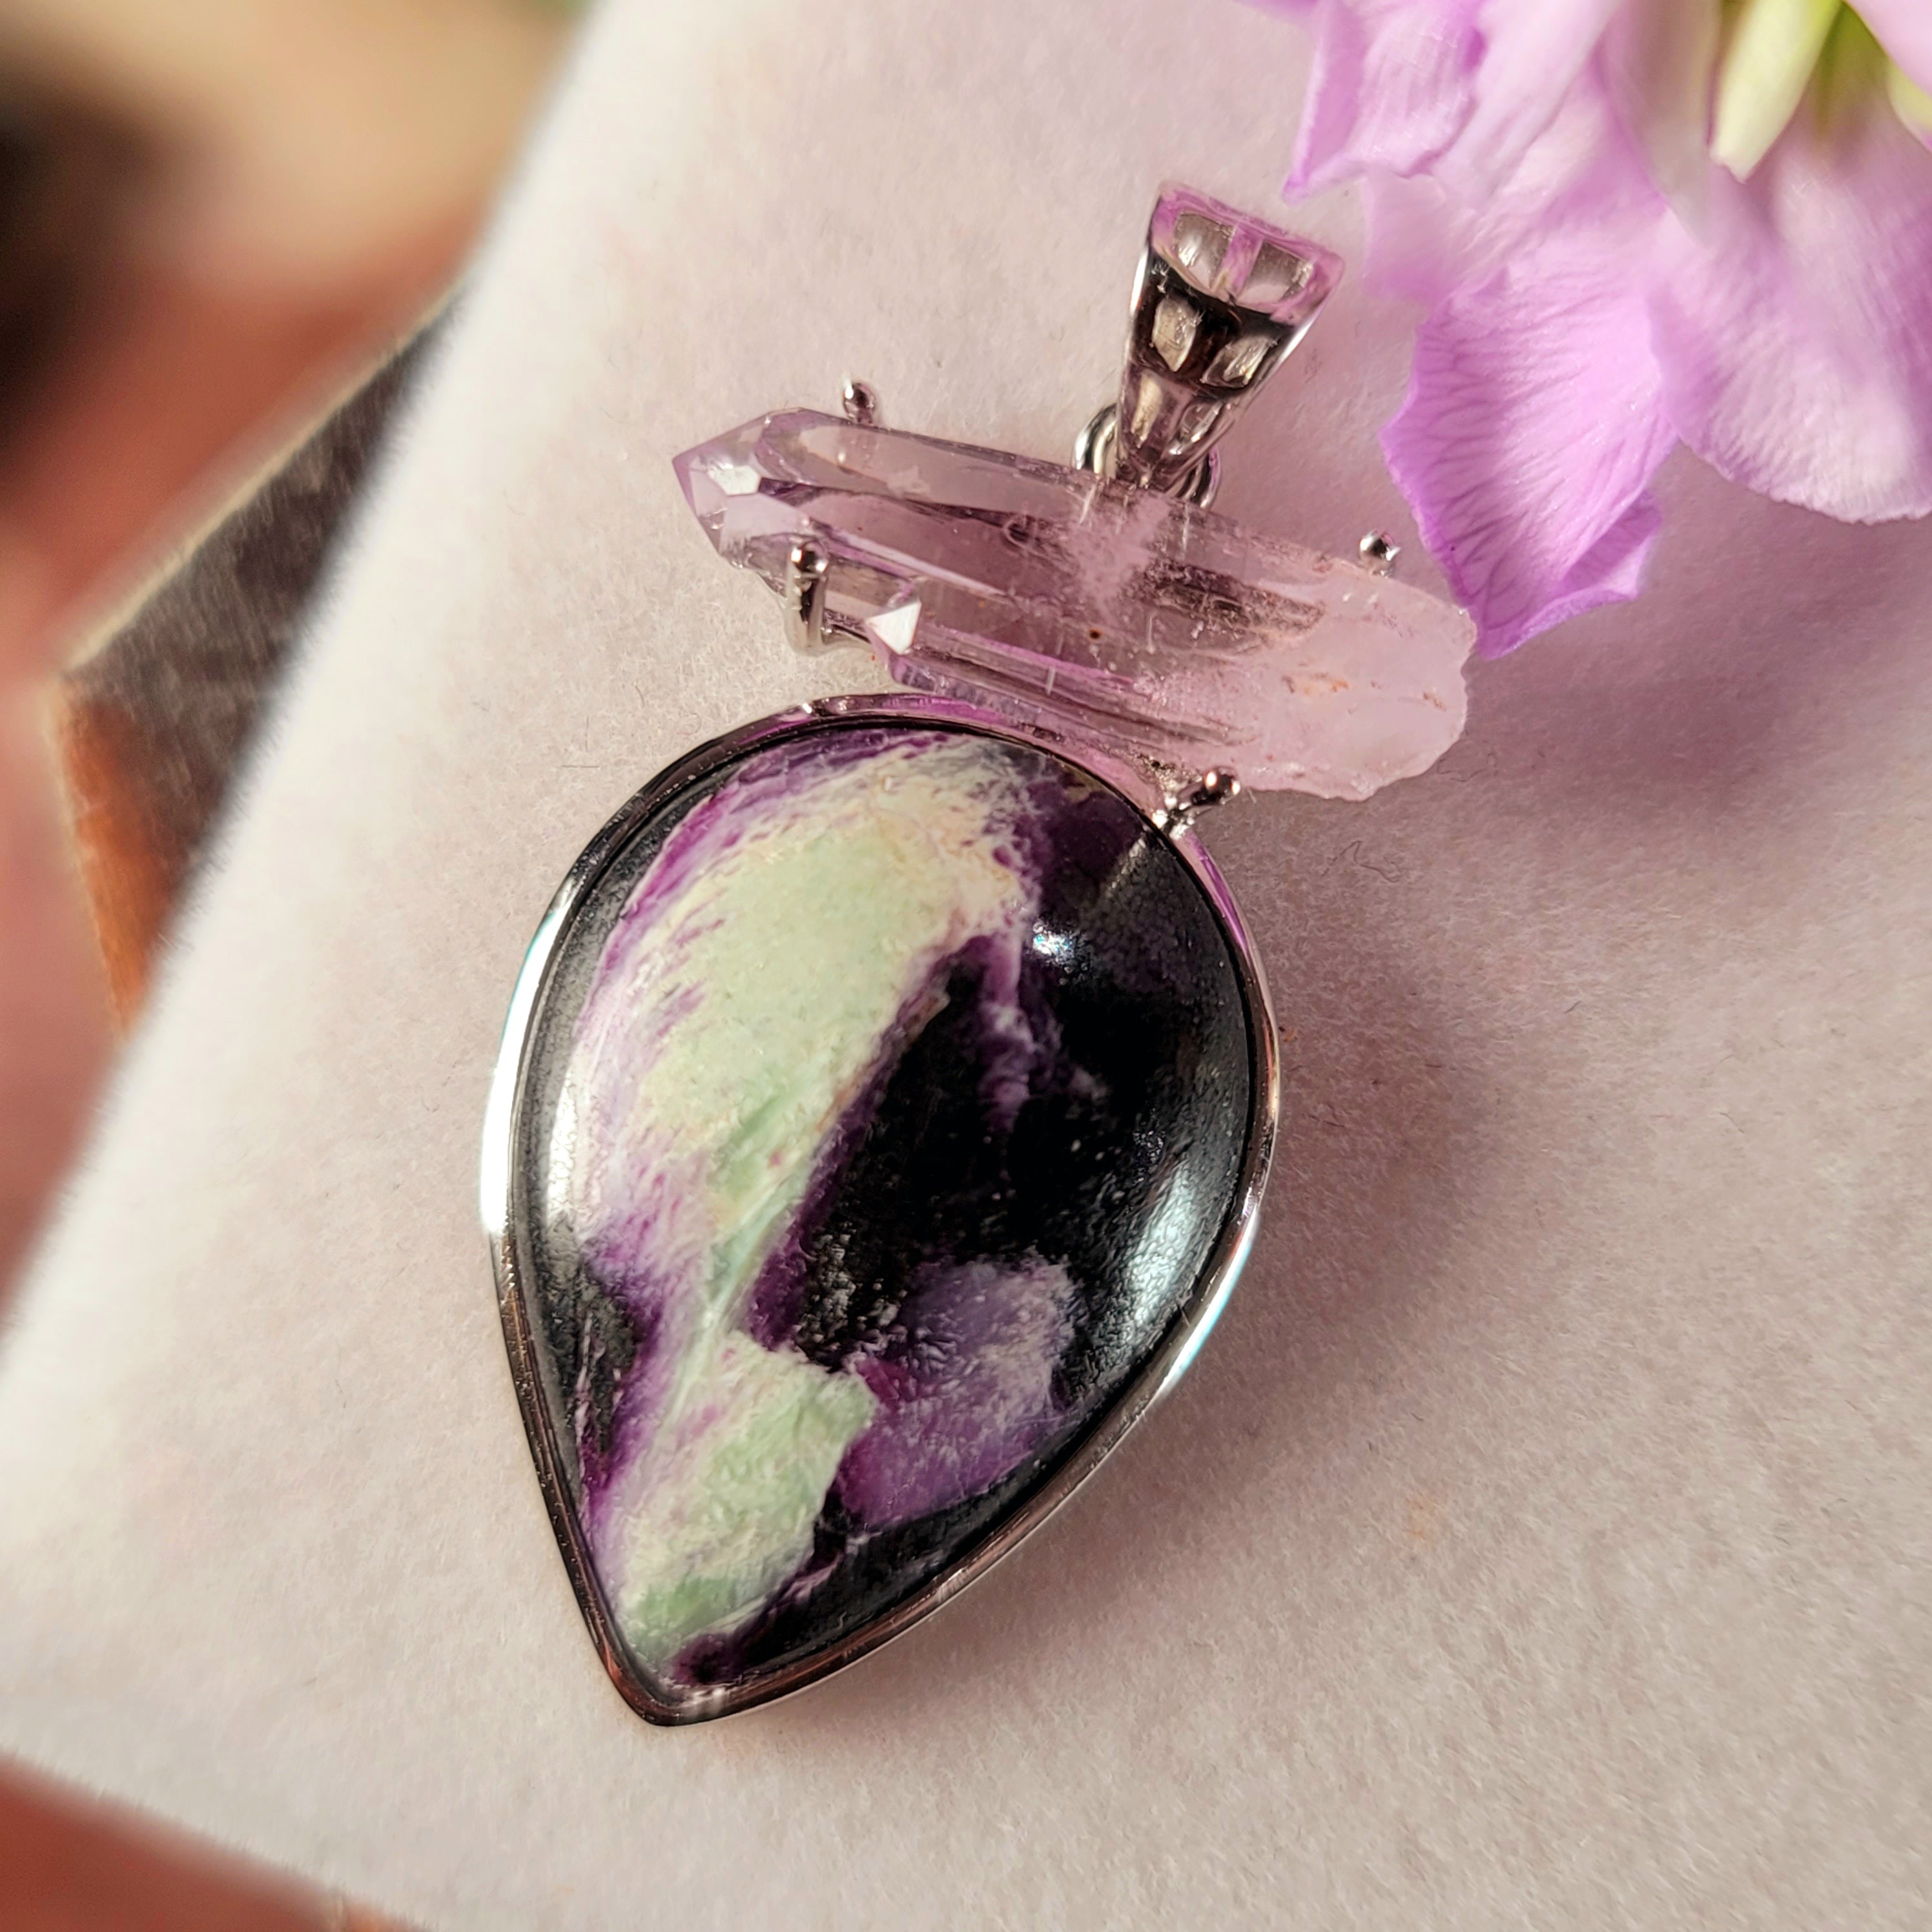 Kammererite x Vera Cruz Amethyst Pendant .925 Silver for Balance, Enlightenment and Communicating with Spirit